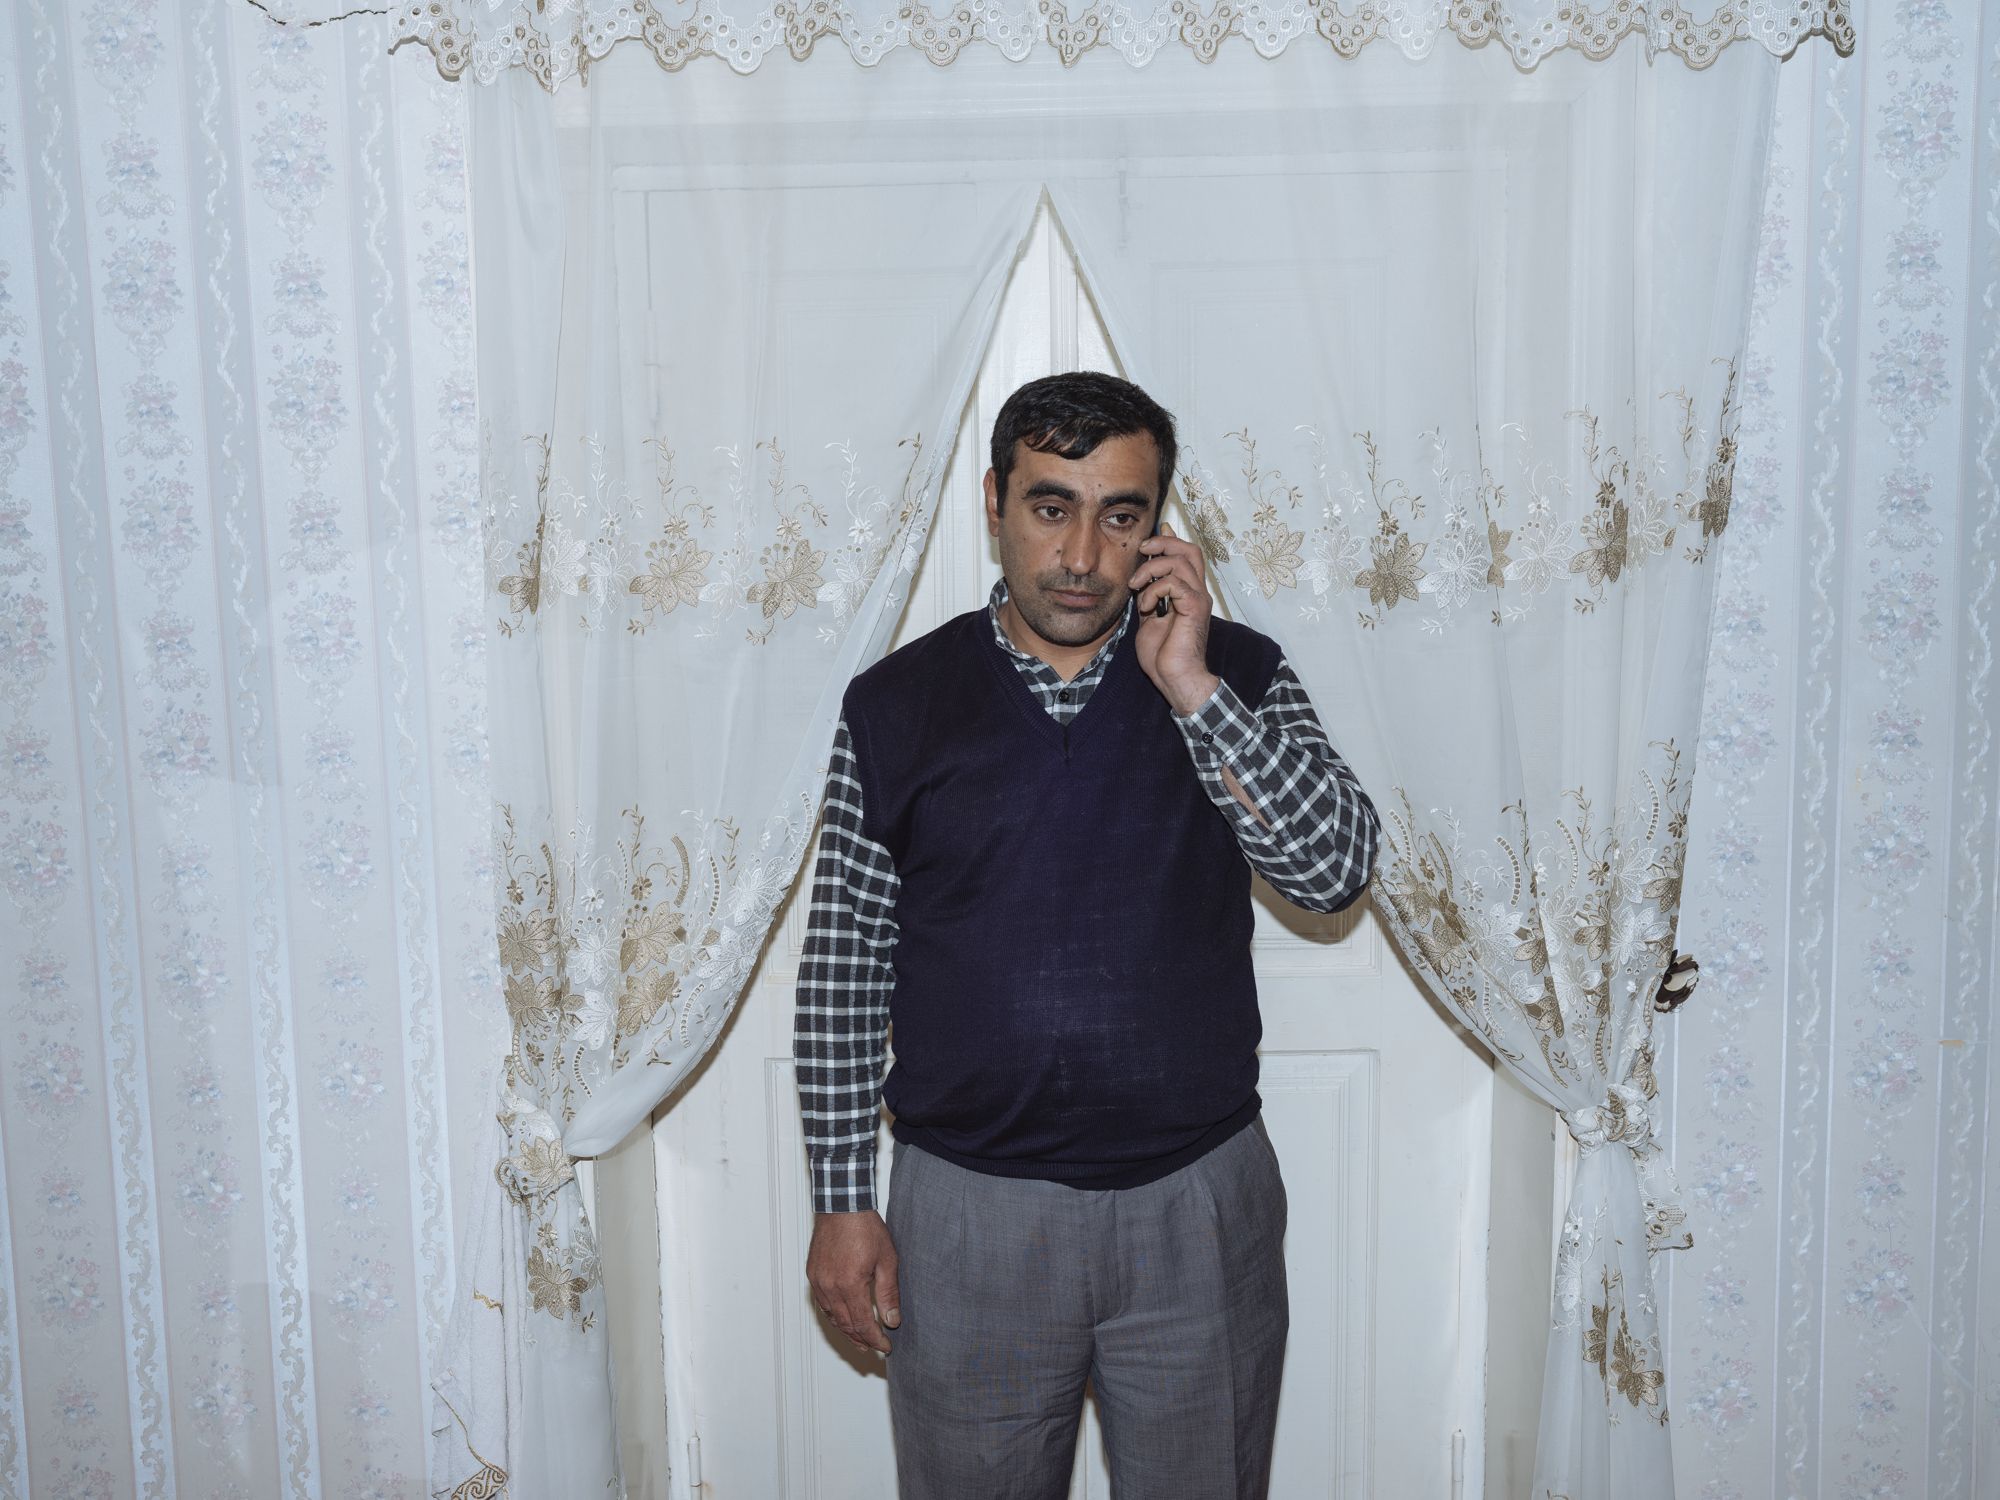 Behruz, 36, a telephone line repairer, speaks on the phone at his home in Sivu village.

Like lots of men in rural areas, Behruz's father works in Russia for significantly higher wages. The wives of such migrant workers must then not only work in farm production but also maintain their homes and raise their children. Image by Emin Ozmen / Magnum Photos. Azerbaijan, 2018.